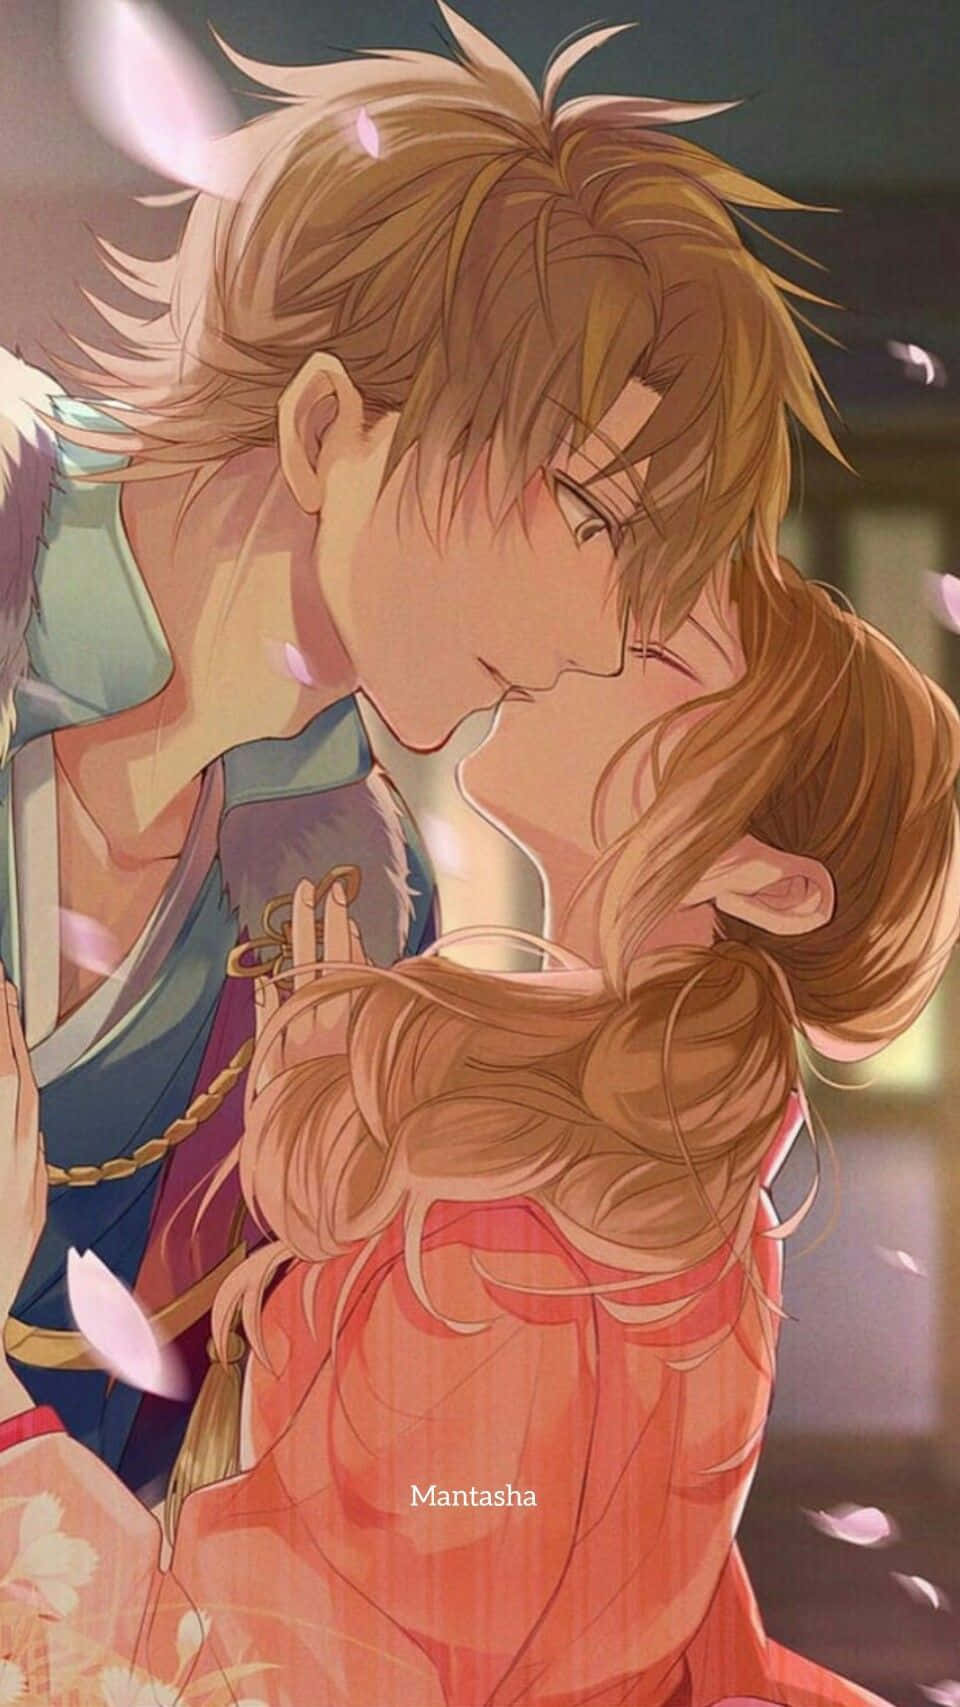 Adorable anime couple in a dreamy embrace Wallpaper